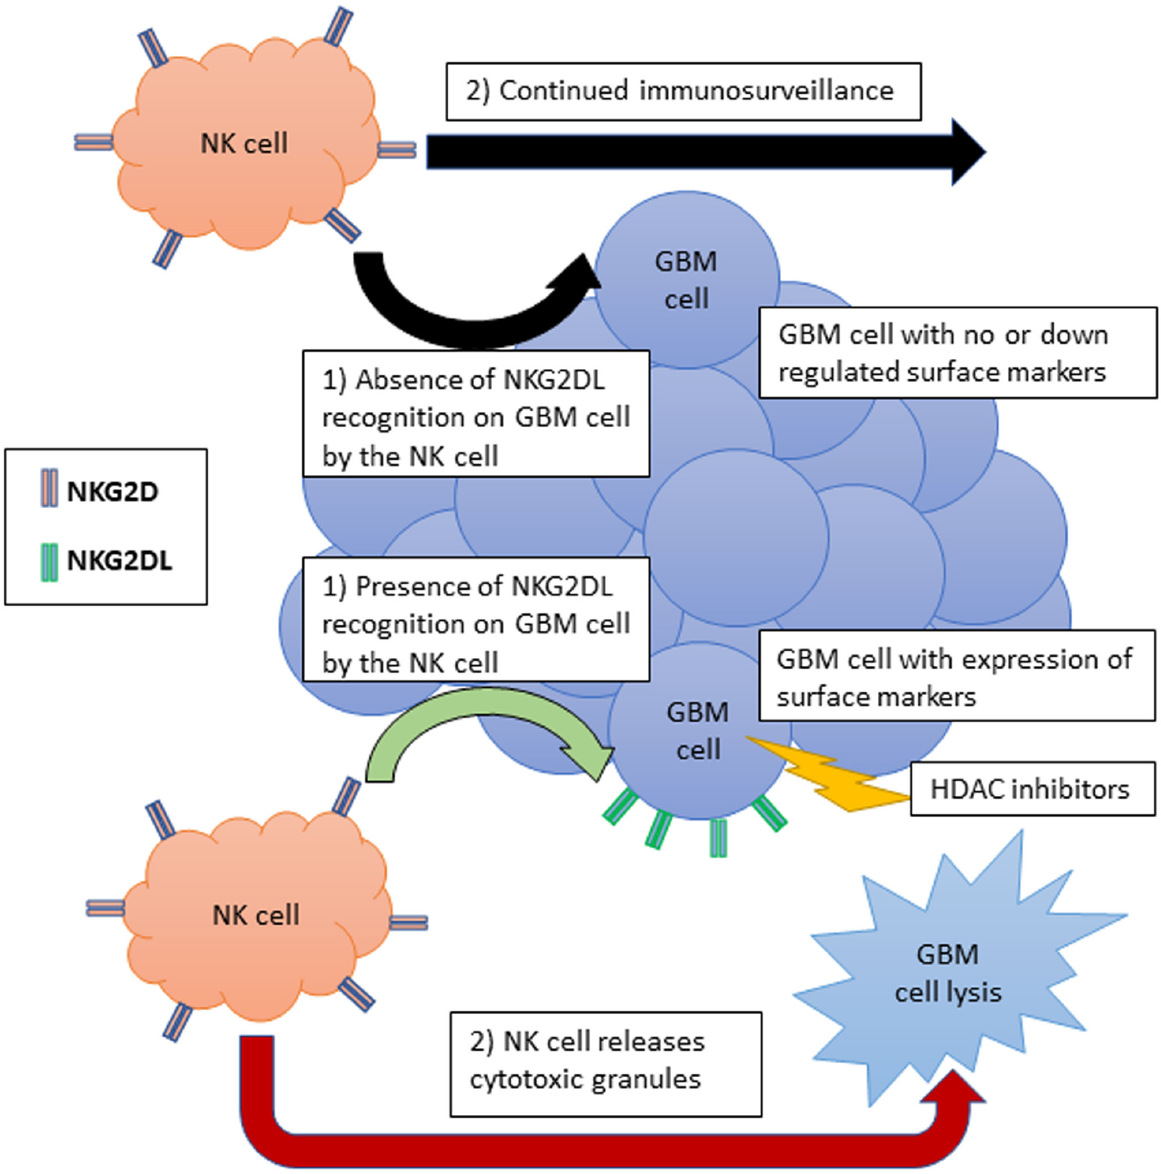 Histone deacetylase enzymes and selective histone deacetylase inhibitors for antitumor effects and enhancement of antitumor immunity in glioblastoma